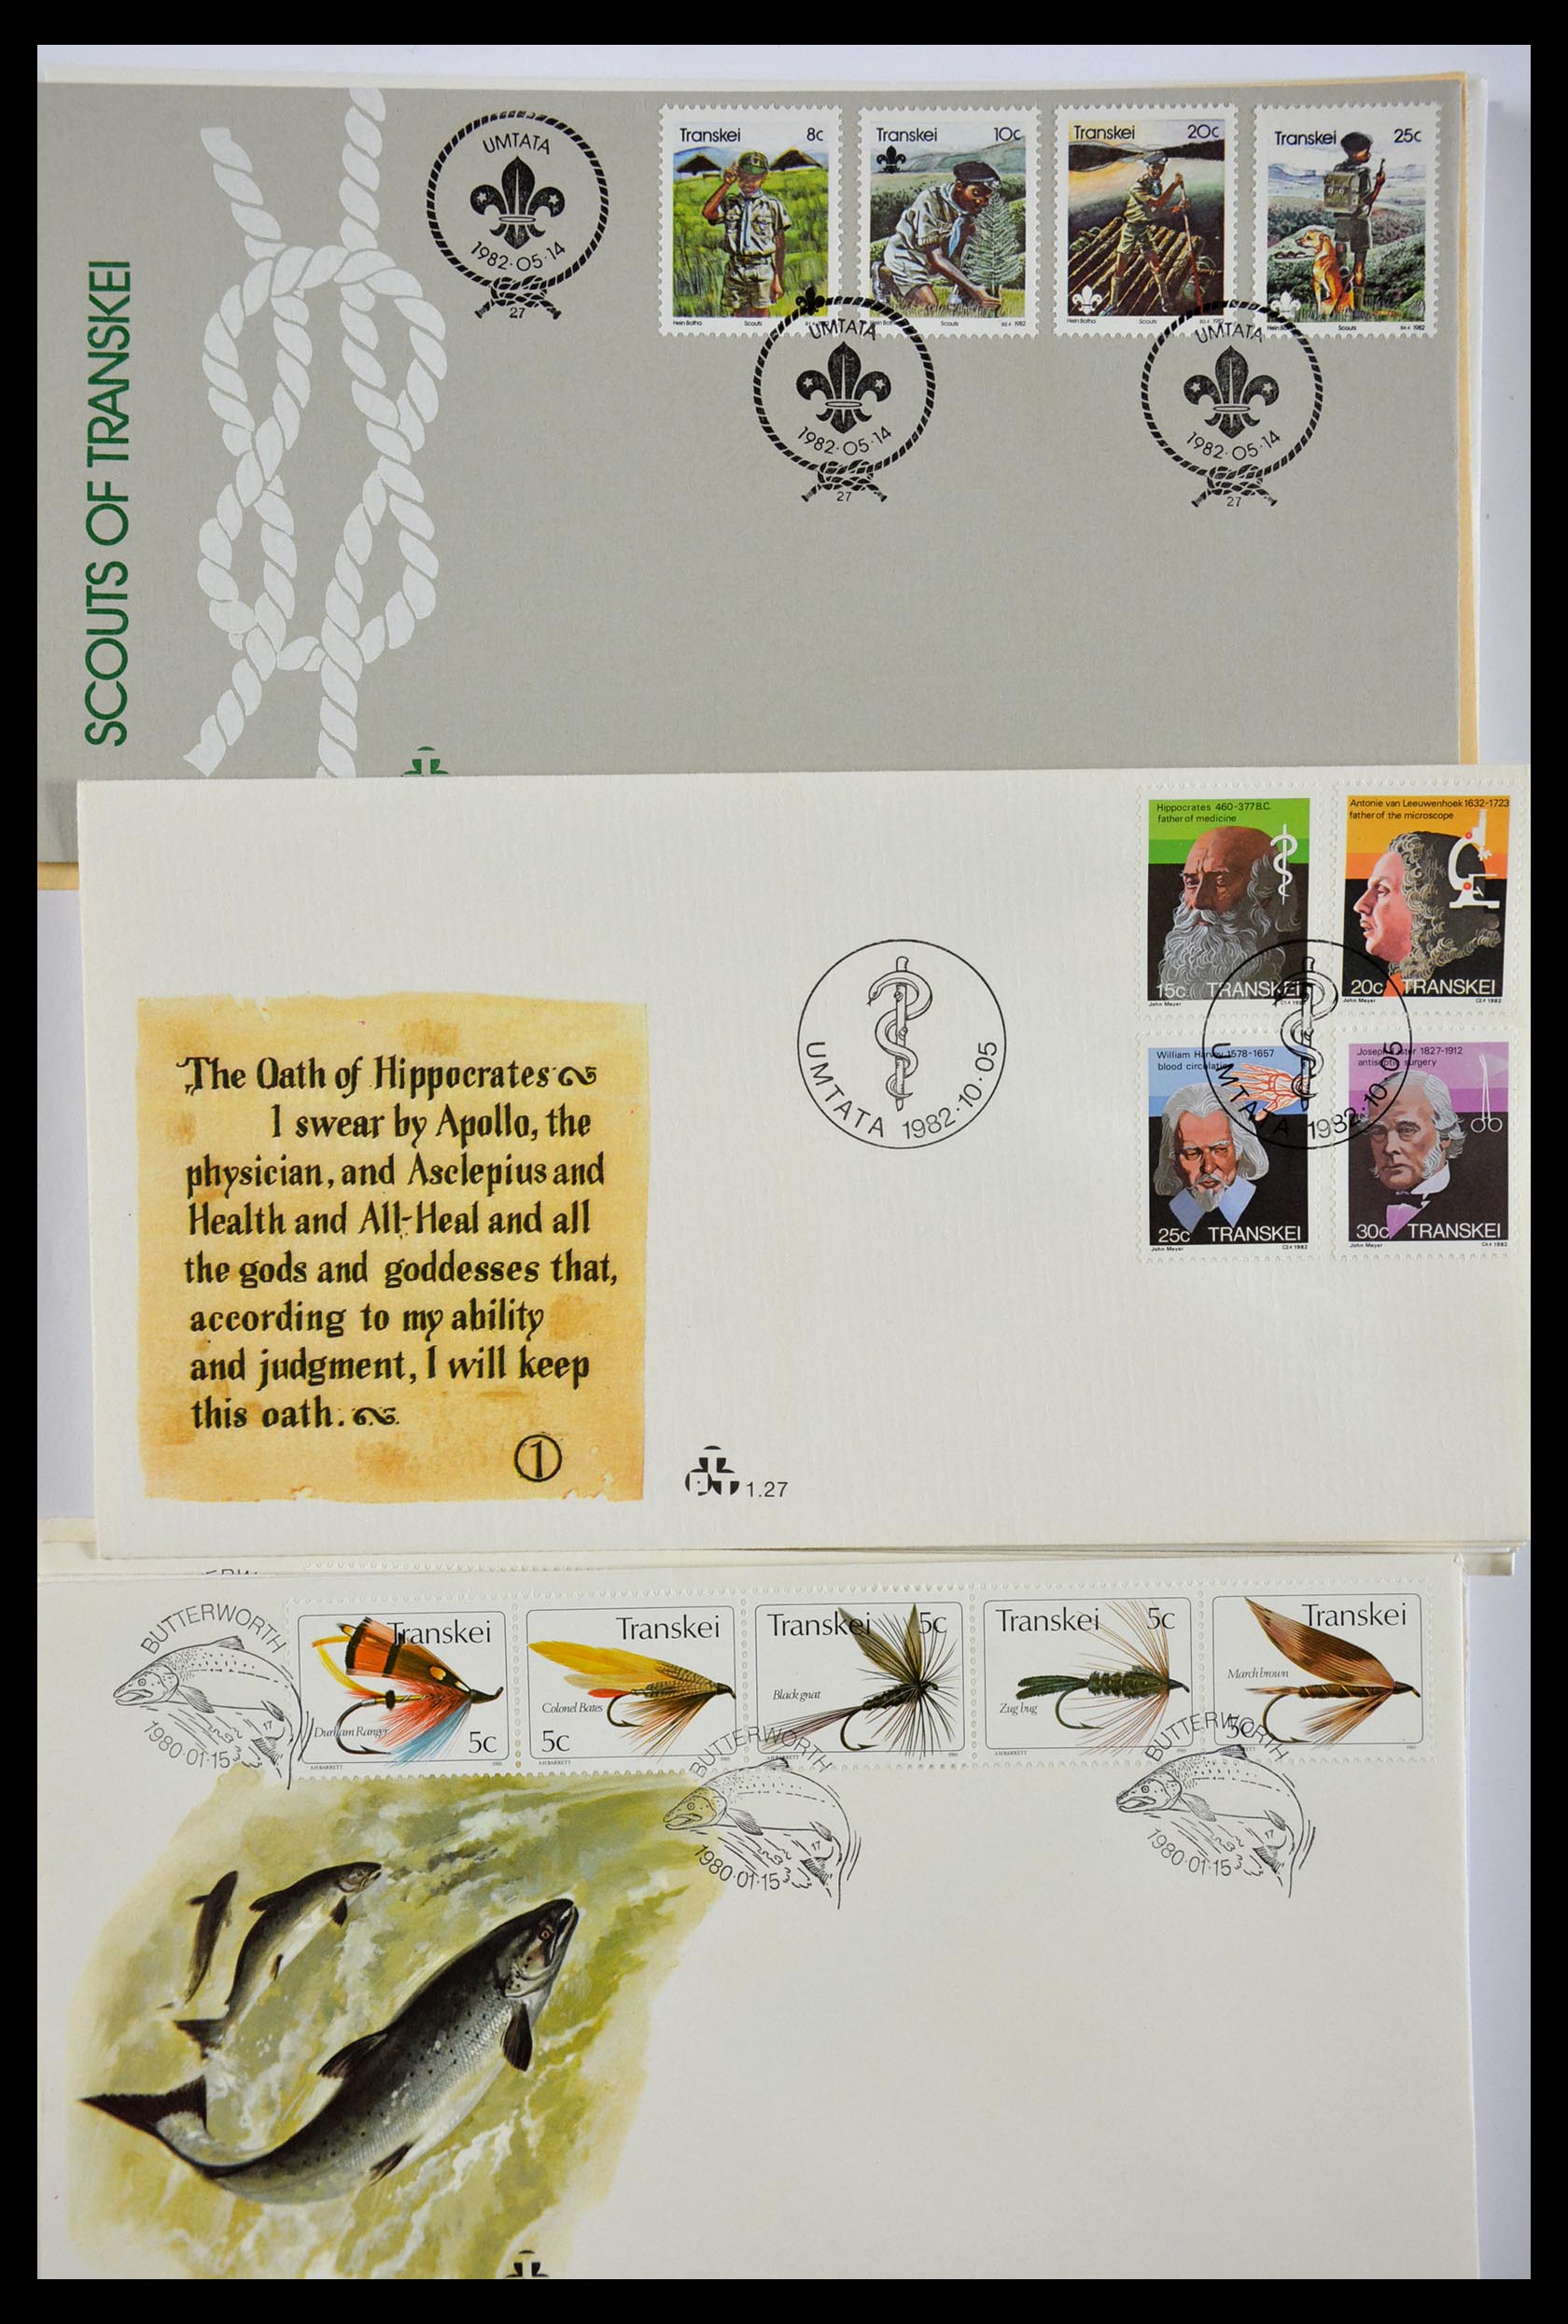 29356 552 - 29356 South Africa homelands first day covers 1979-1991.